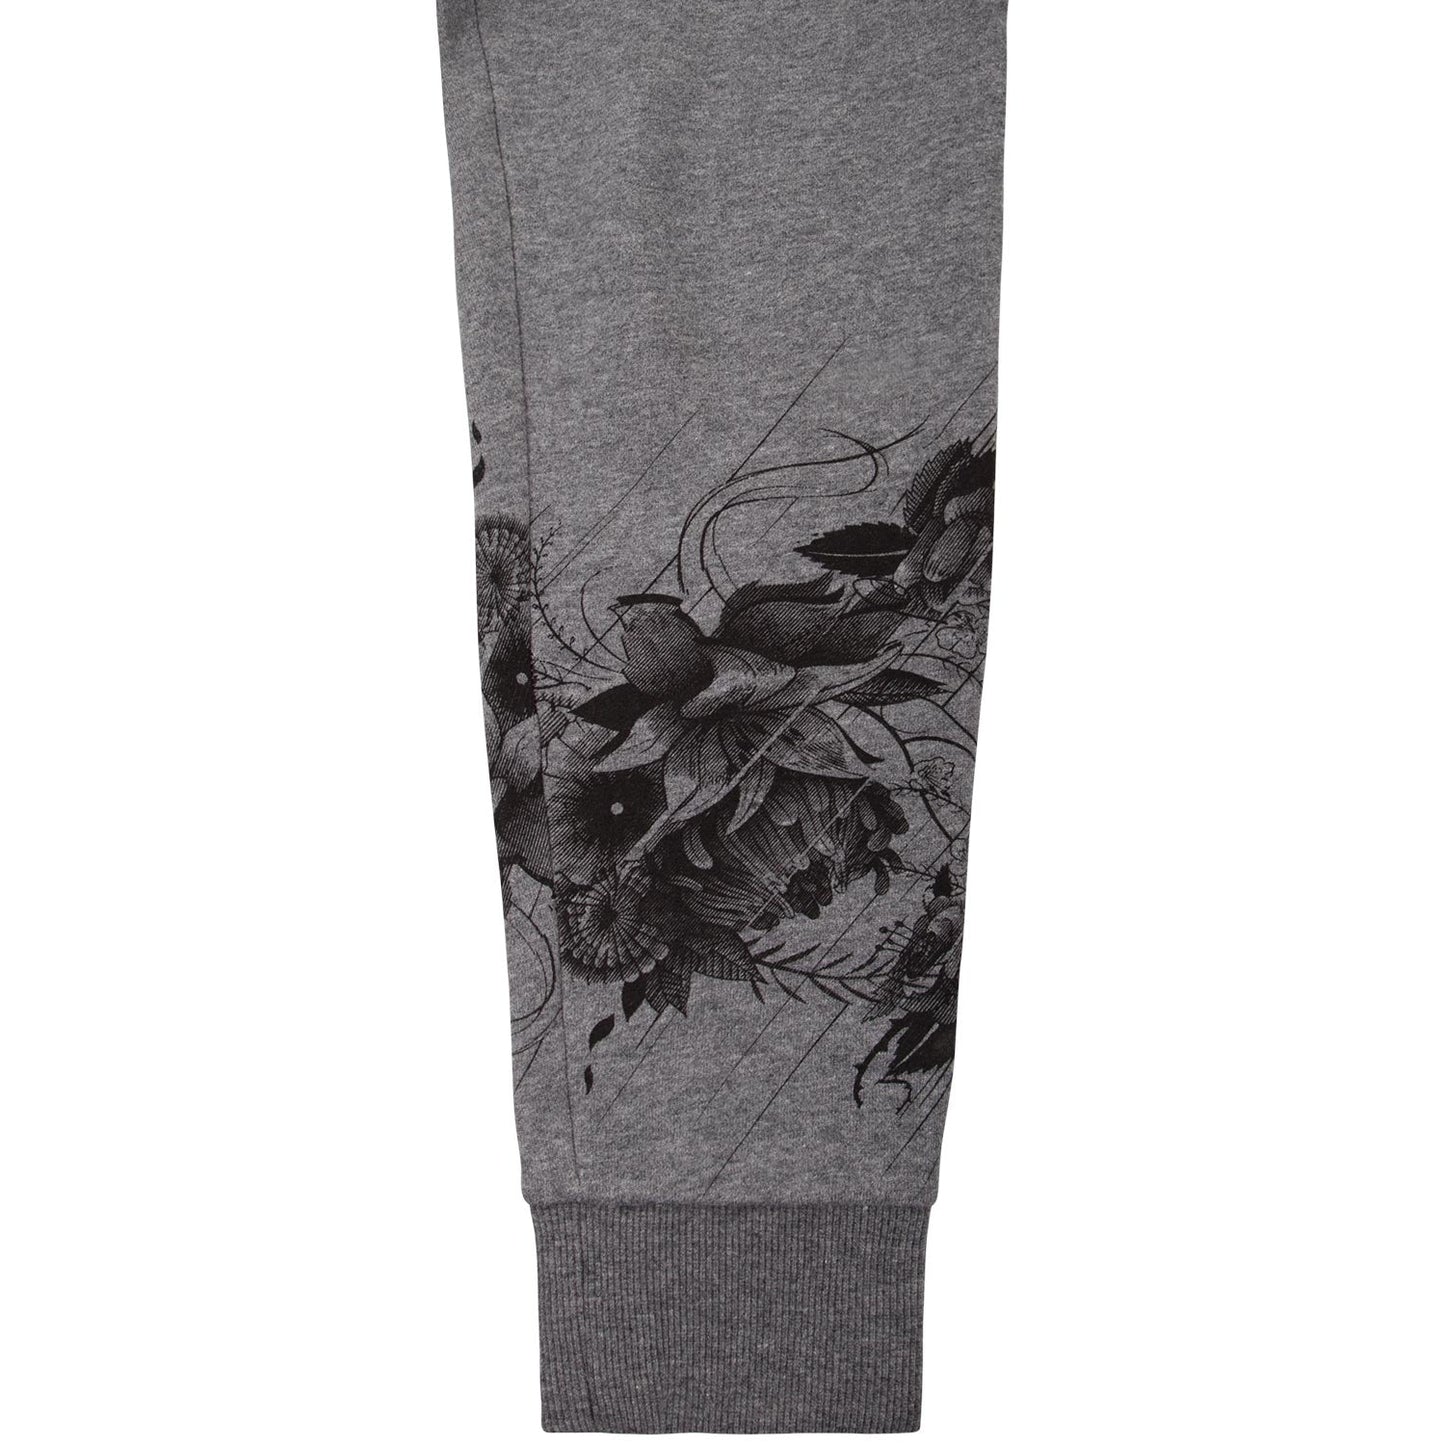 Venum Floral Joggers - Heather Grey - For Women